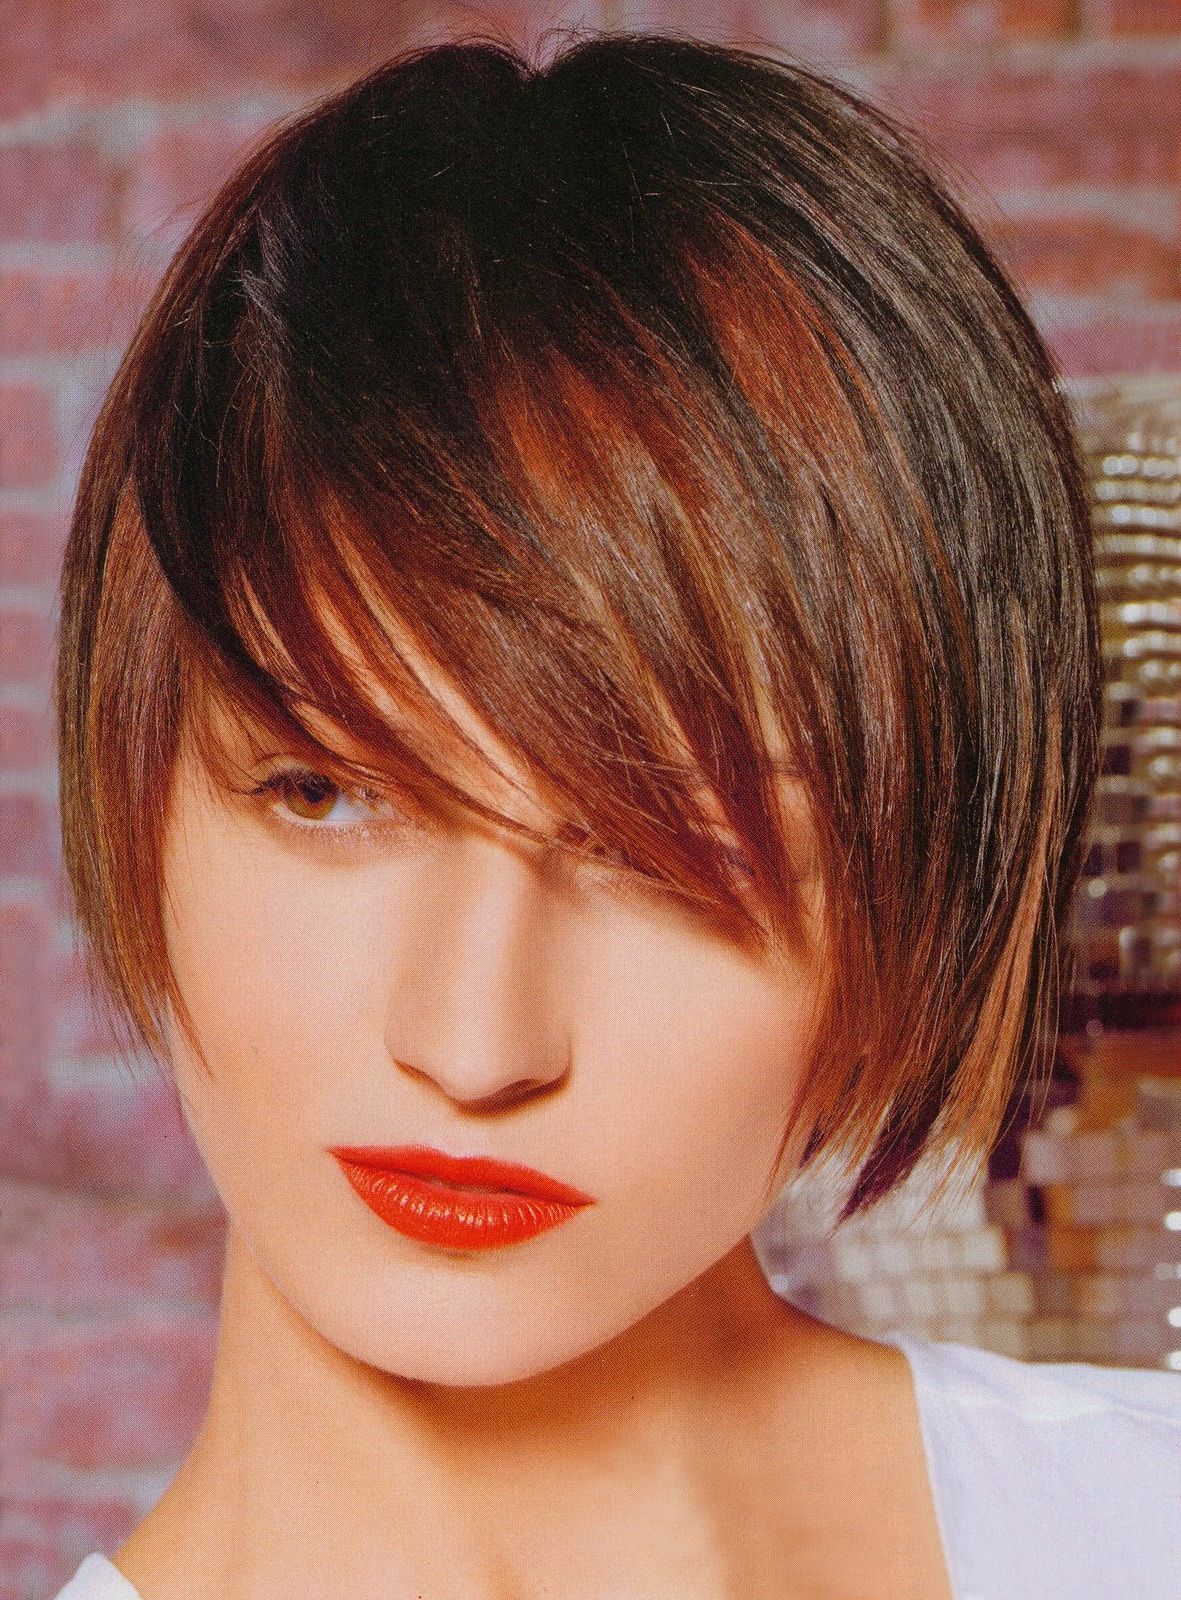 Latest Stacked Bob Hairstyles With Fringe And Light Waves Pertaining To 25+ Layered Bob Haircut Ideas, Designs (View 12 of 20)